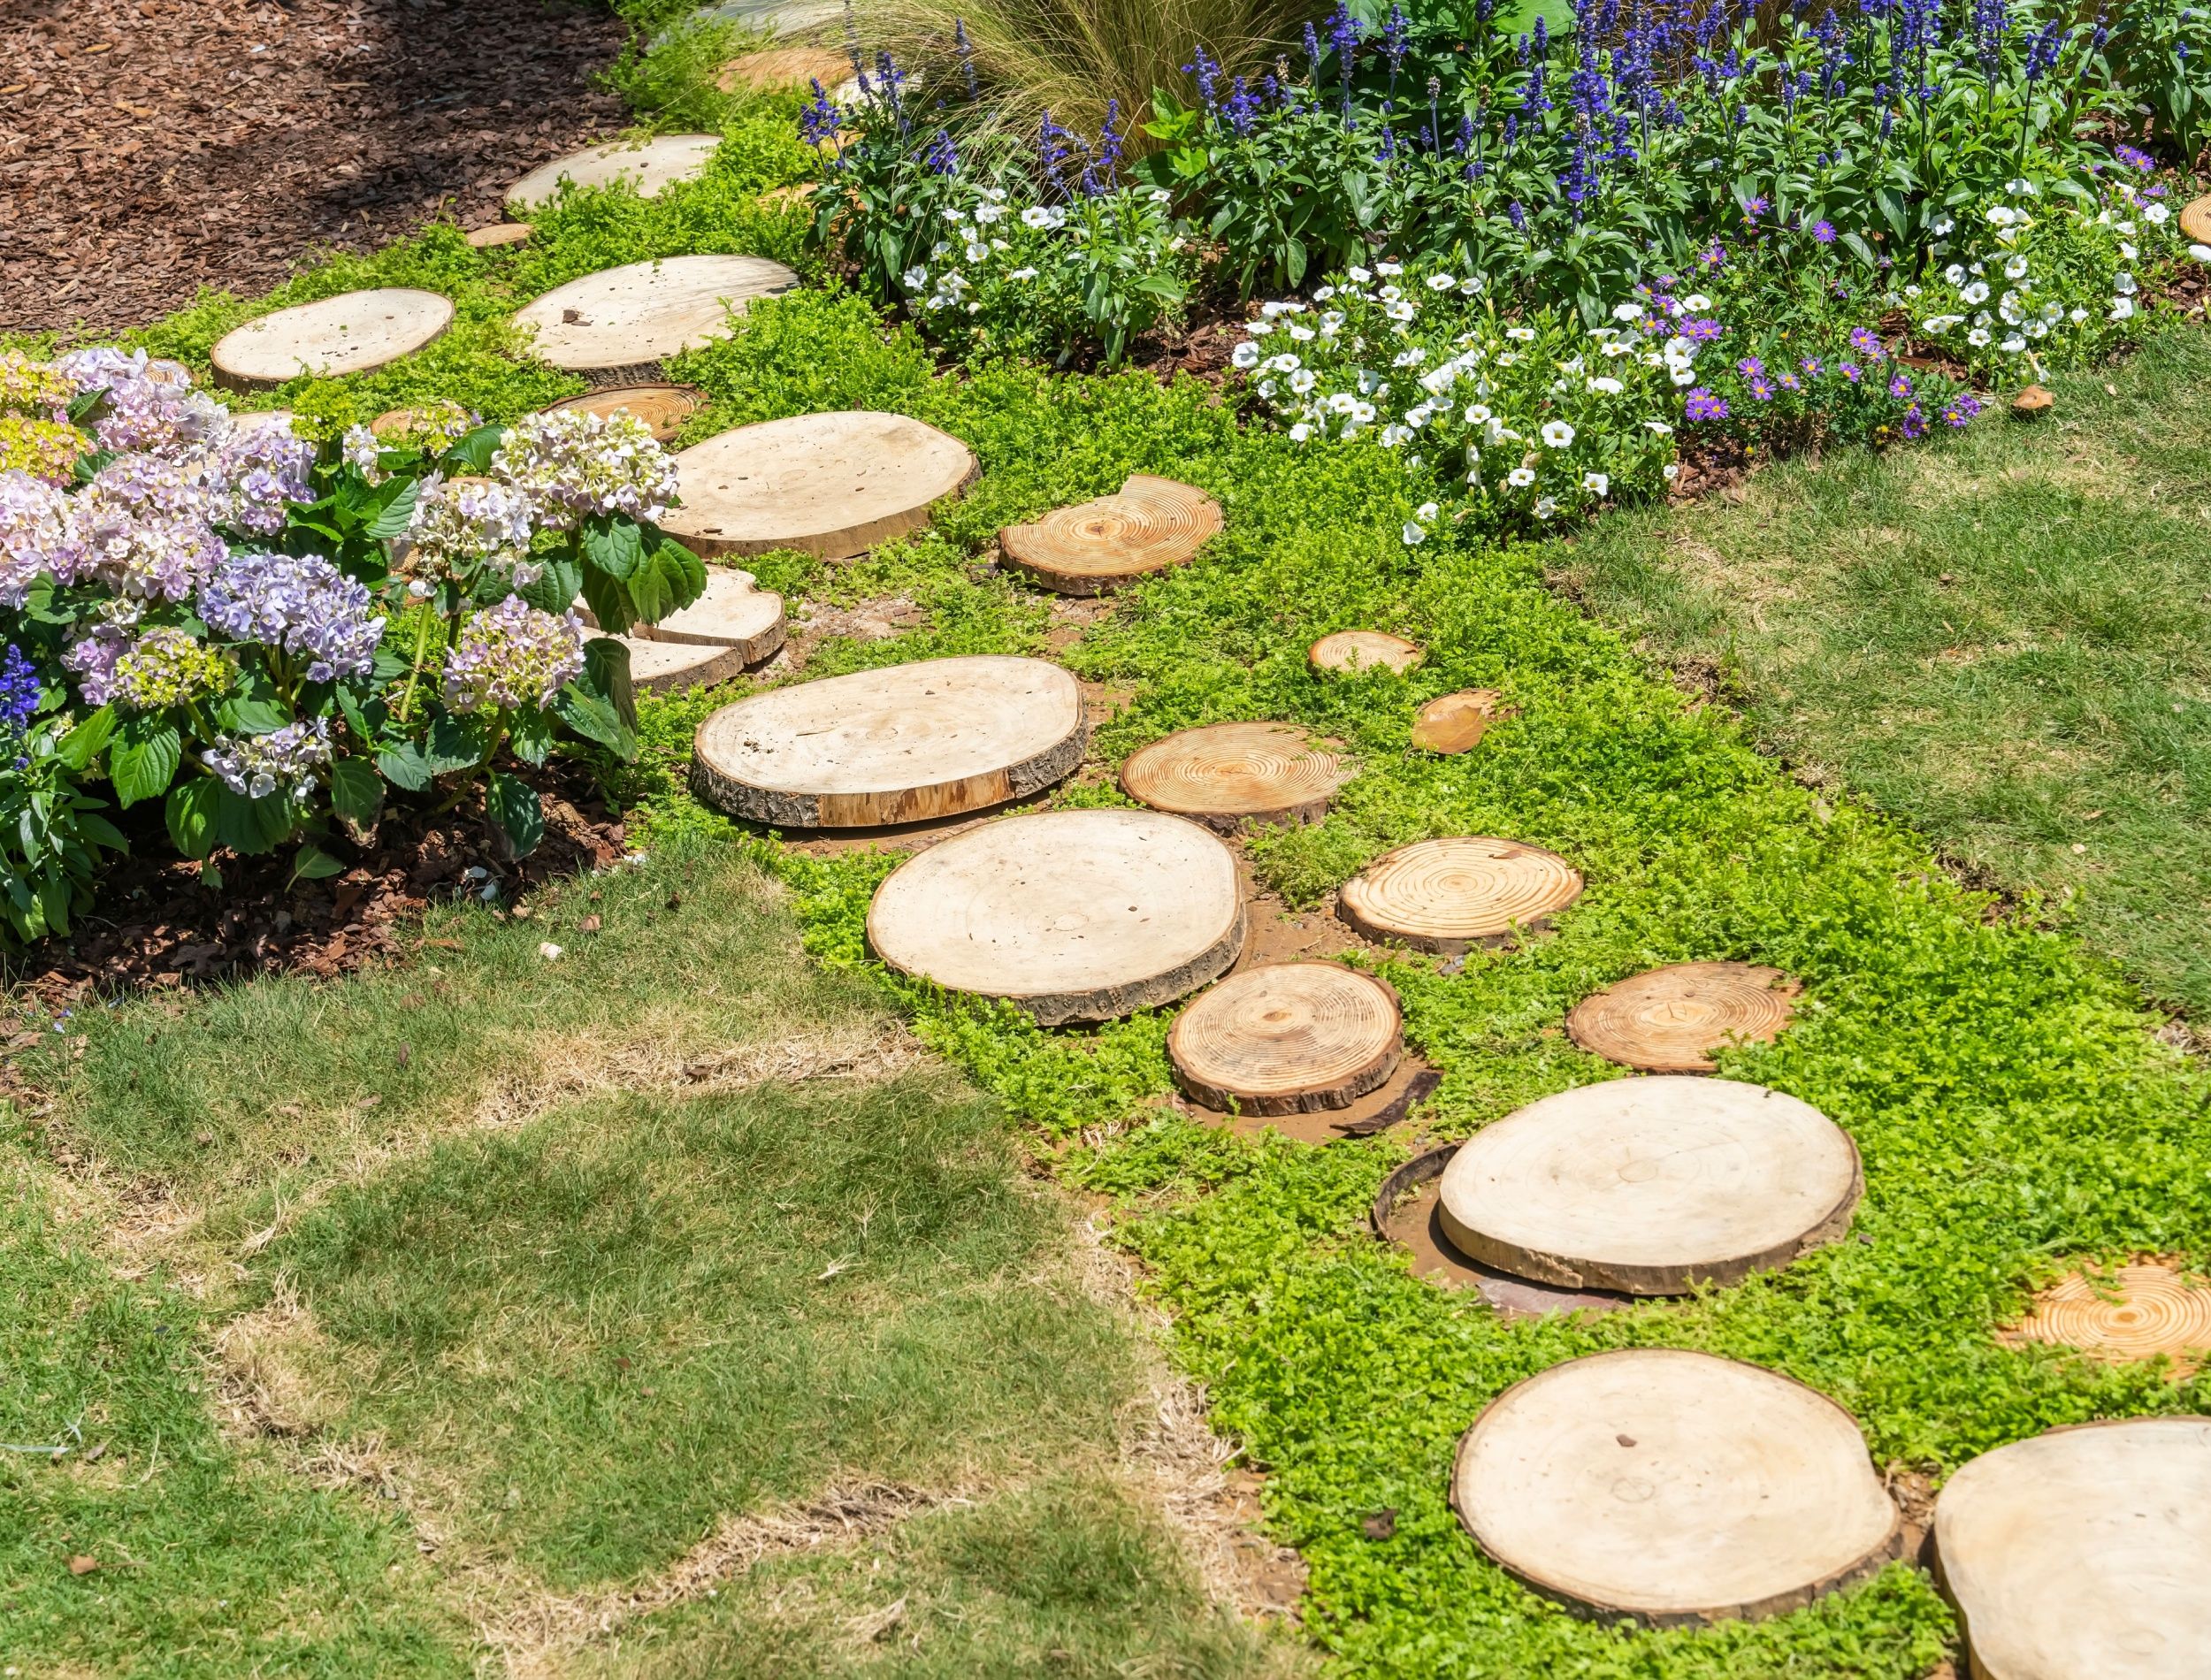 Unique garden path made of tree trunks